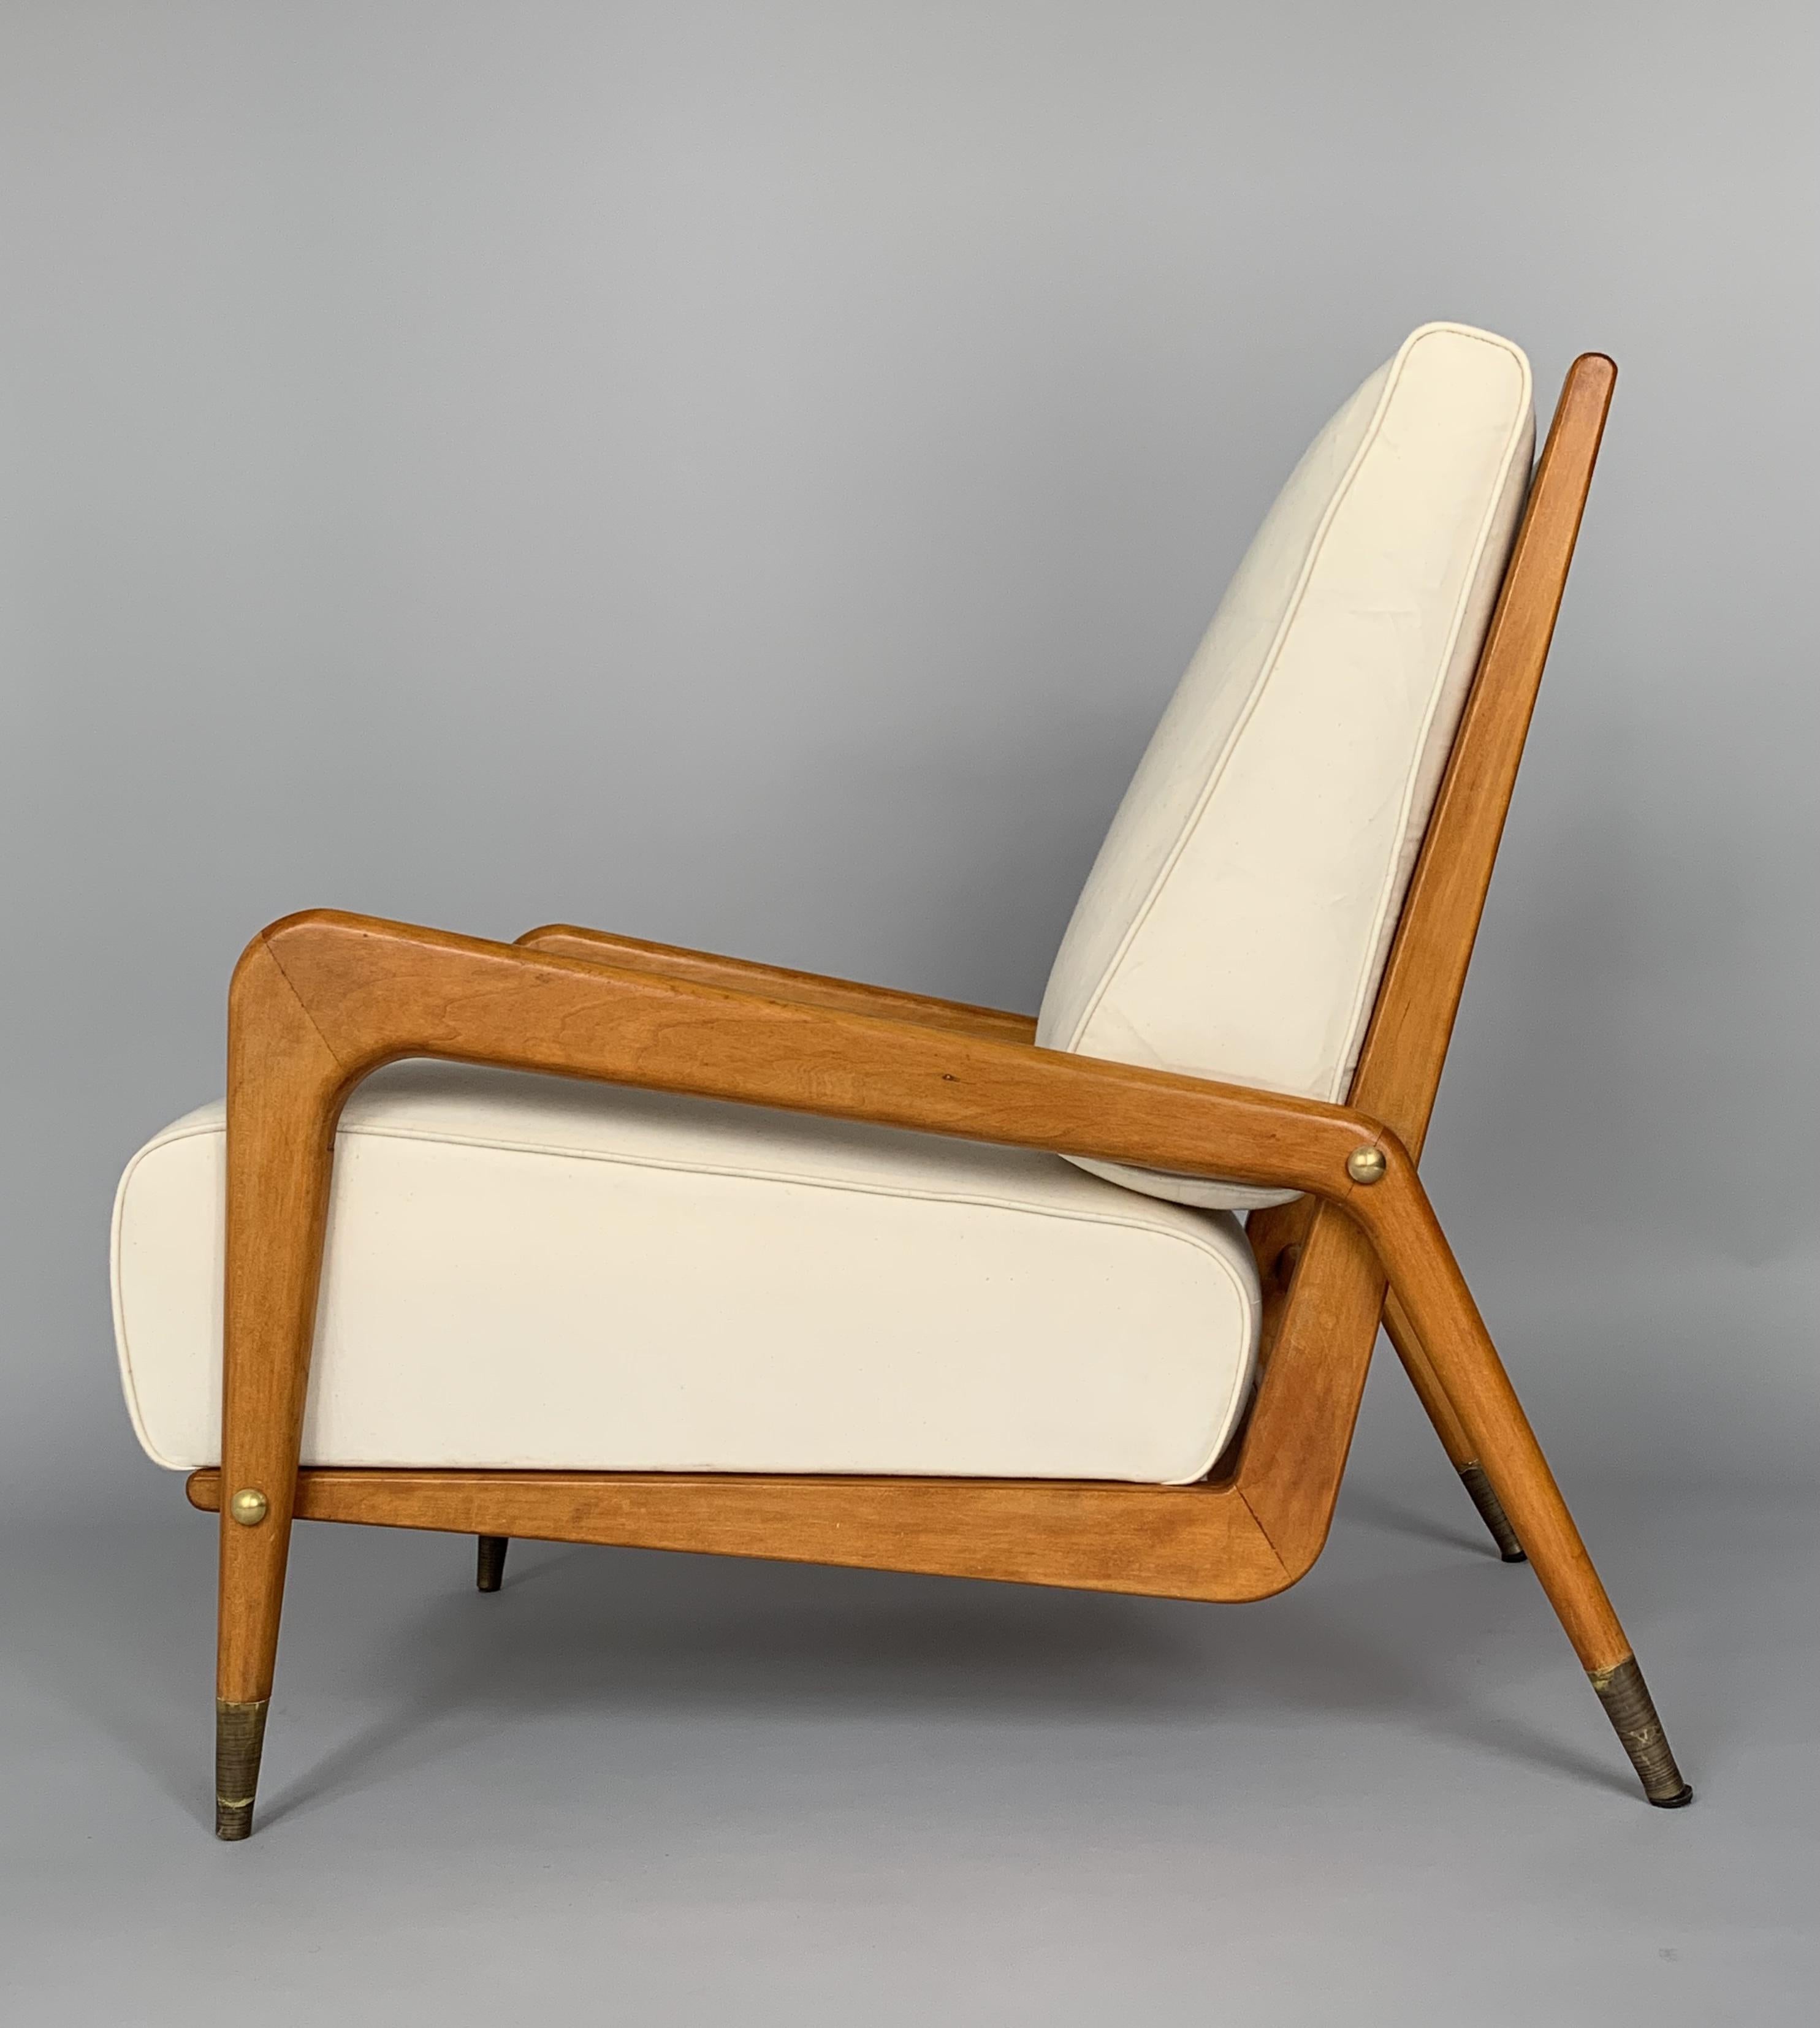 A pair of rare Gio Ponti armchairs.

Manufactured by Casa e Giardino

Date made: c.1937

Dimensions: 30.25” h.  X  24.25” w. X. 33.25” d. 

Place of origin: Italy

Materials: beech and brass.

Similar example: Domus, no. 113, May 1937, p. 51